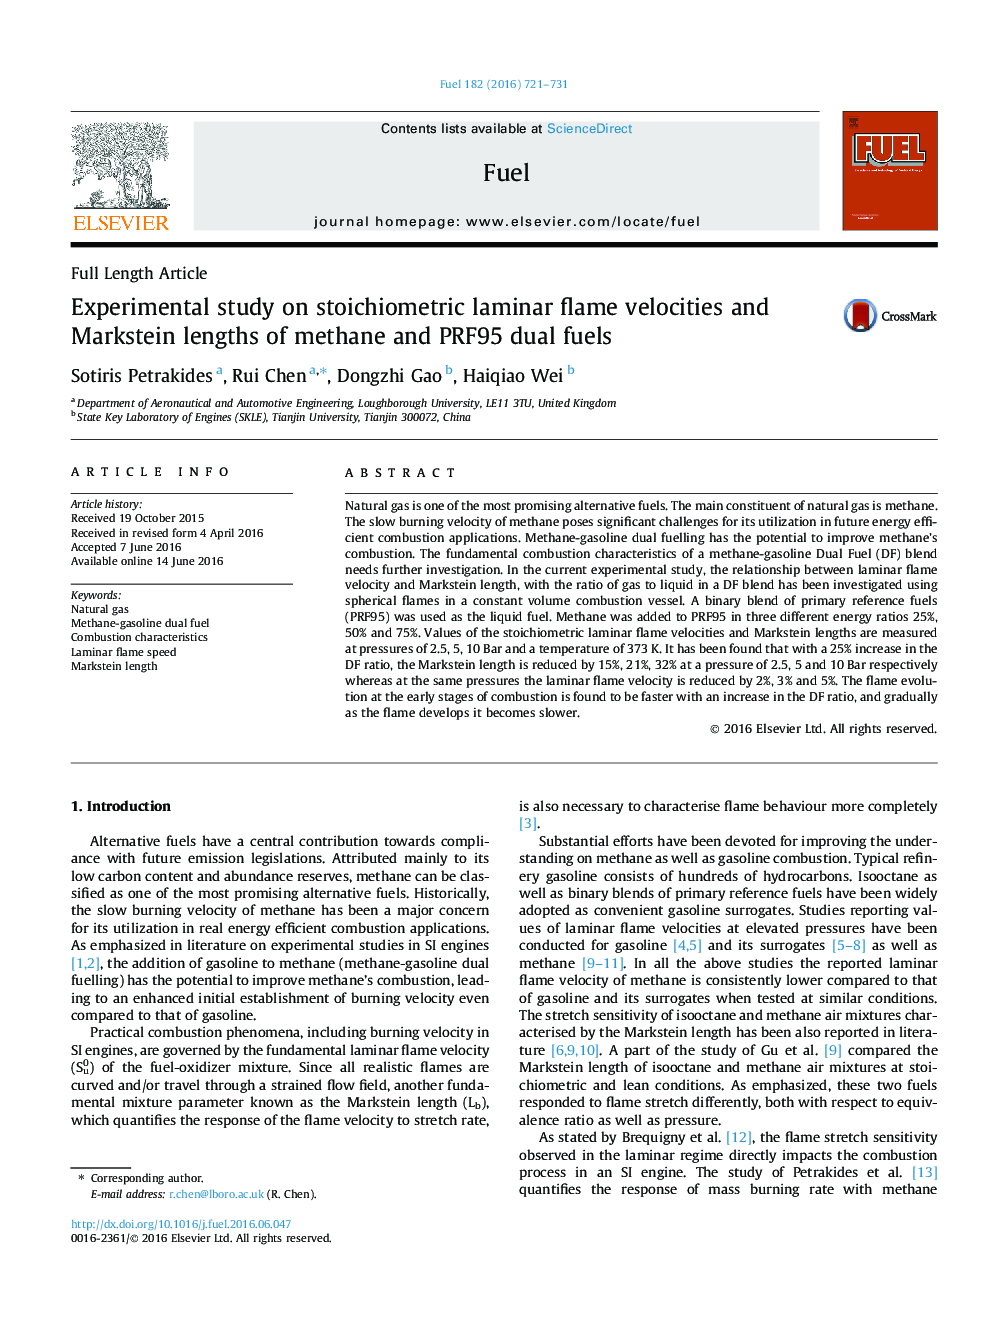 Experimental study on stoichiometric laminar flame velocities and Markstein lengths of methane and PRF95 dual fuels